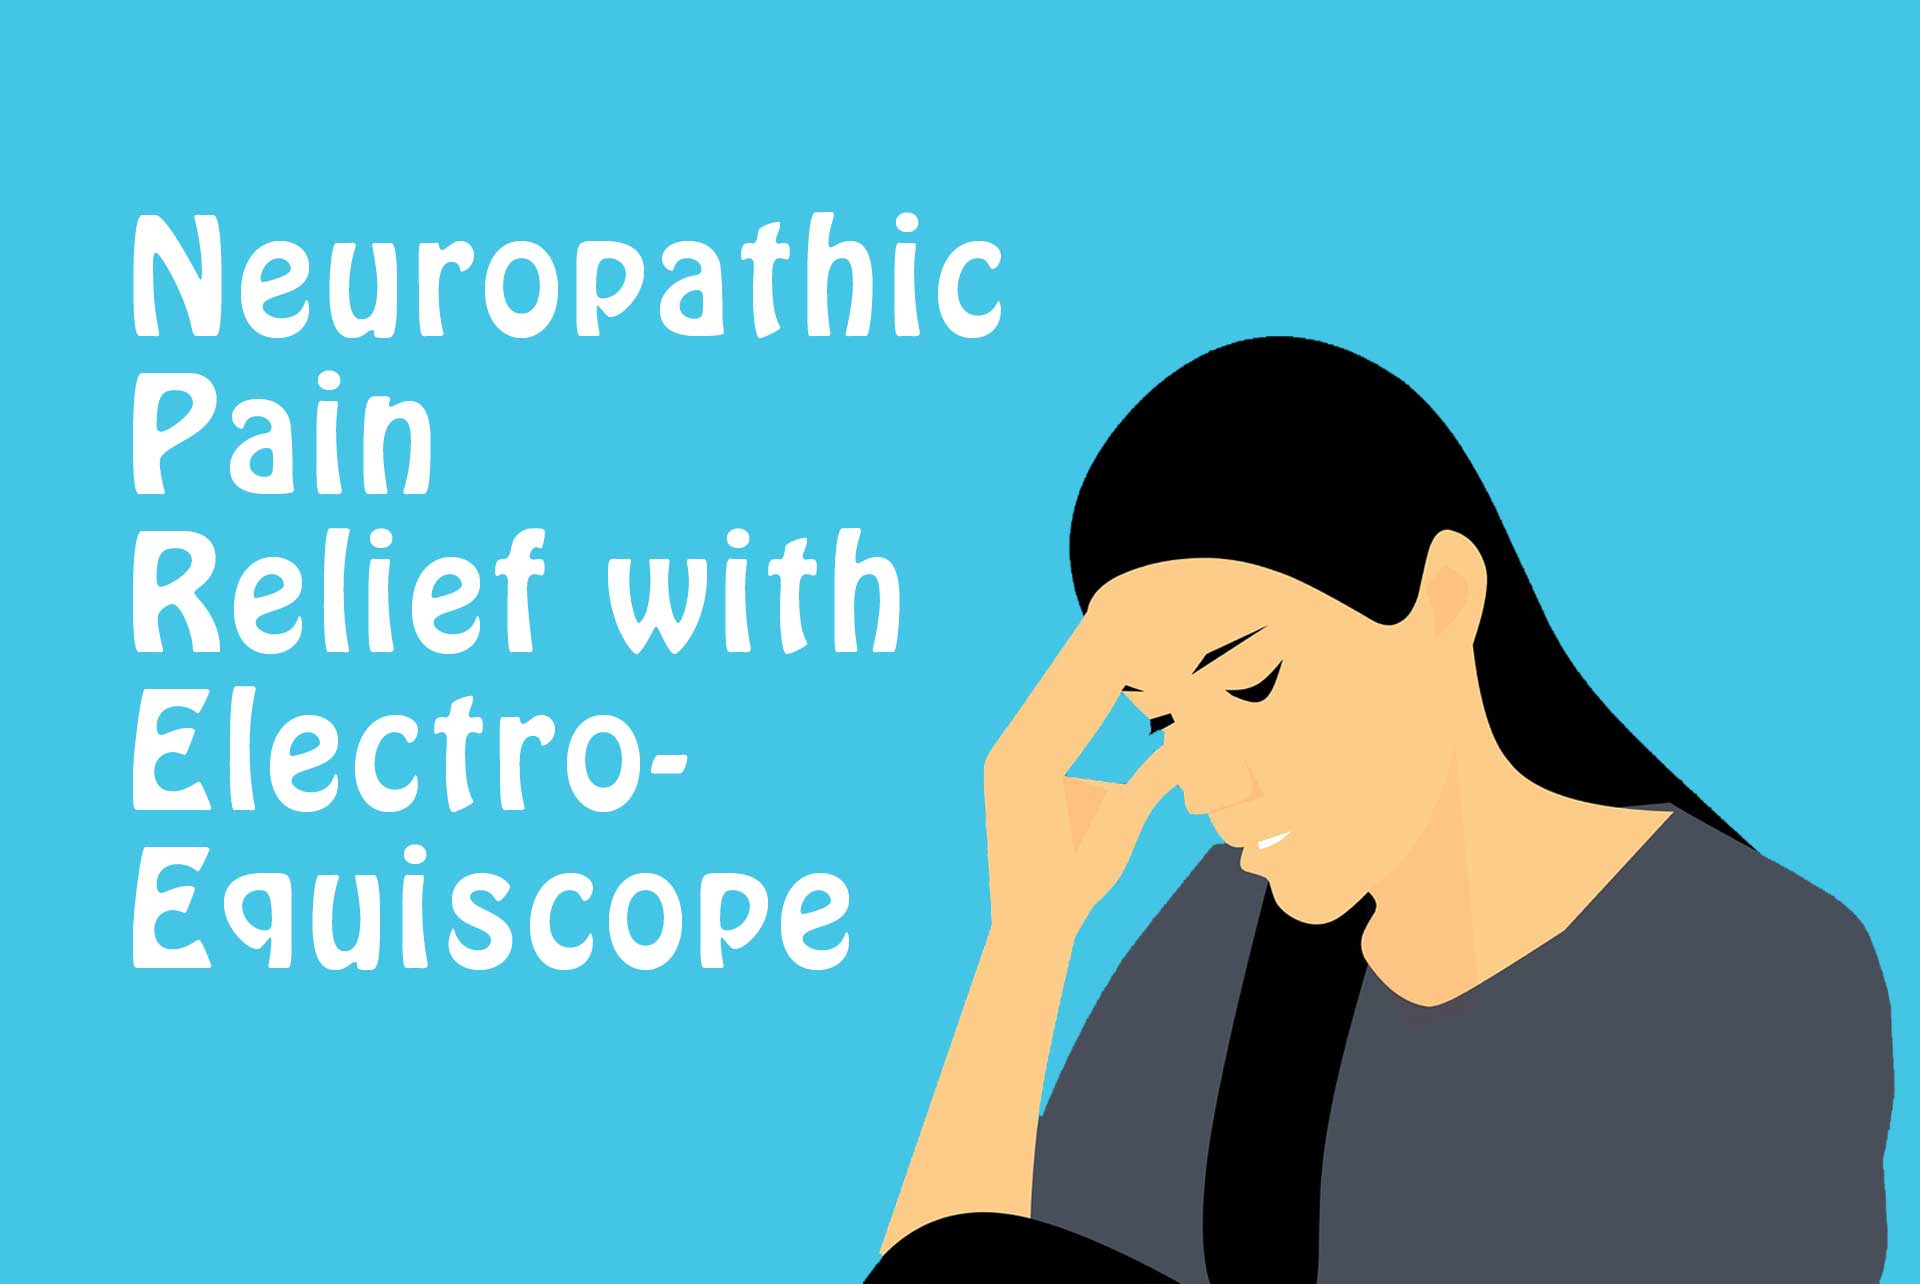 Woman with hand on her painful forehead to illustrate the need for neuropathic pain relief